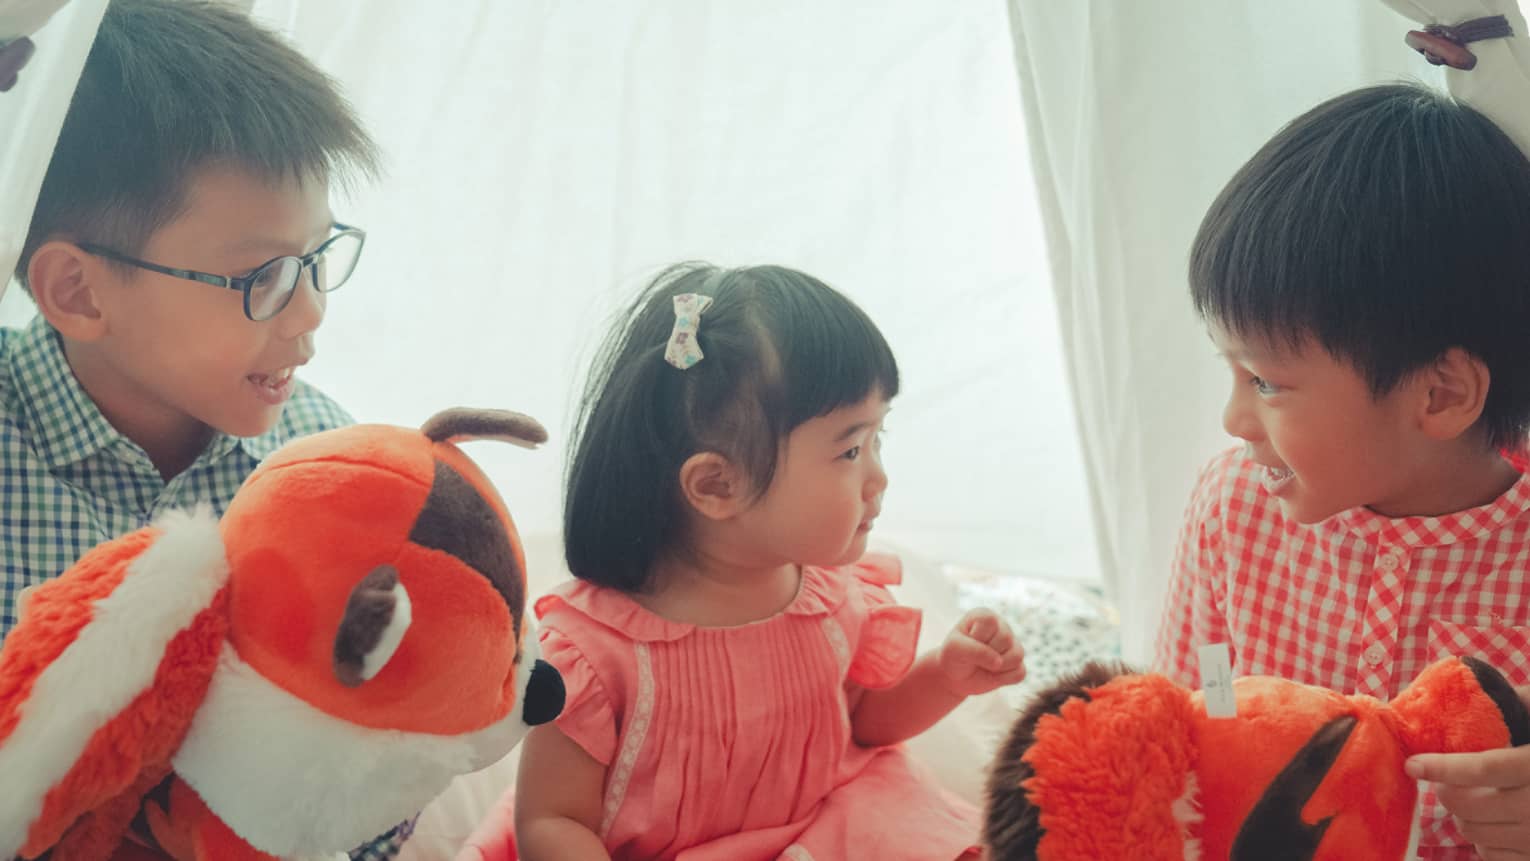 Three young children playing with stuffed animals under a tent.